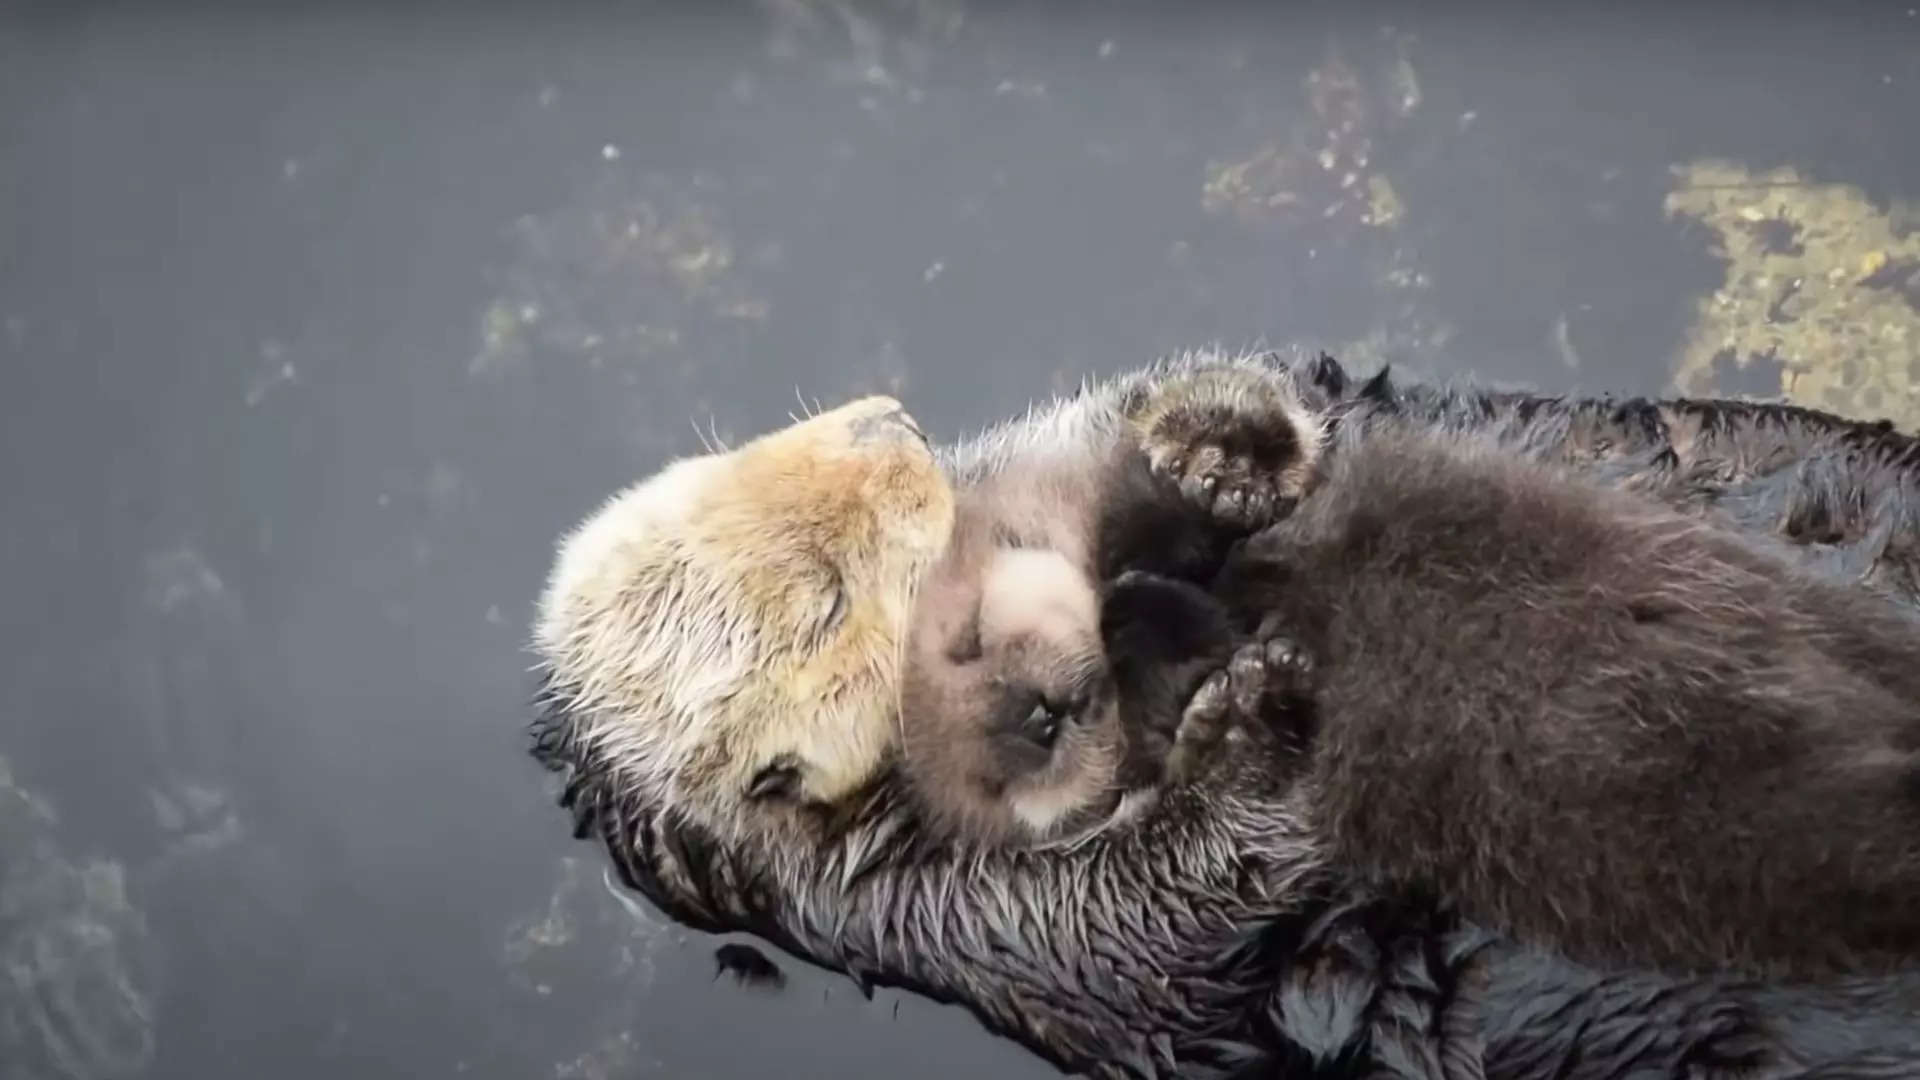 The wild newborn otter sleeps as the mother grooms the baby